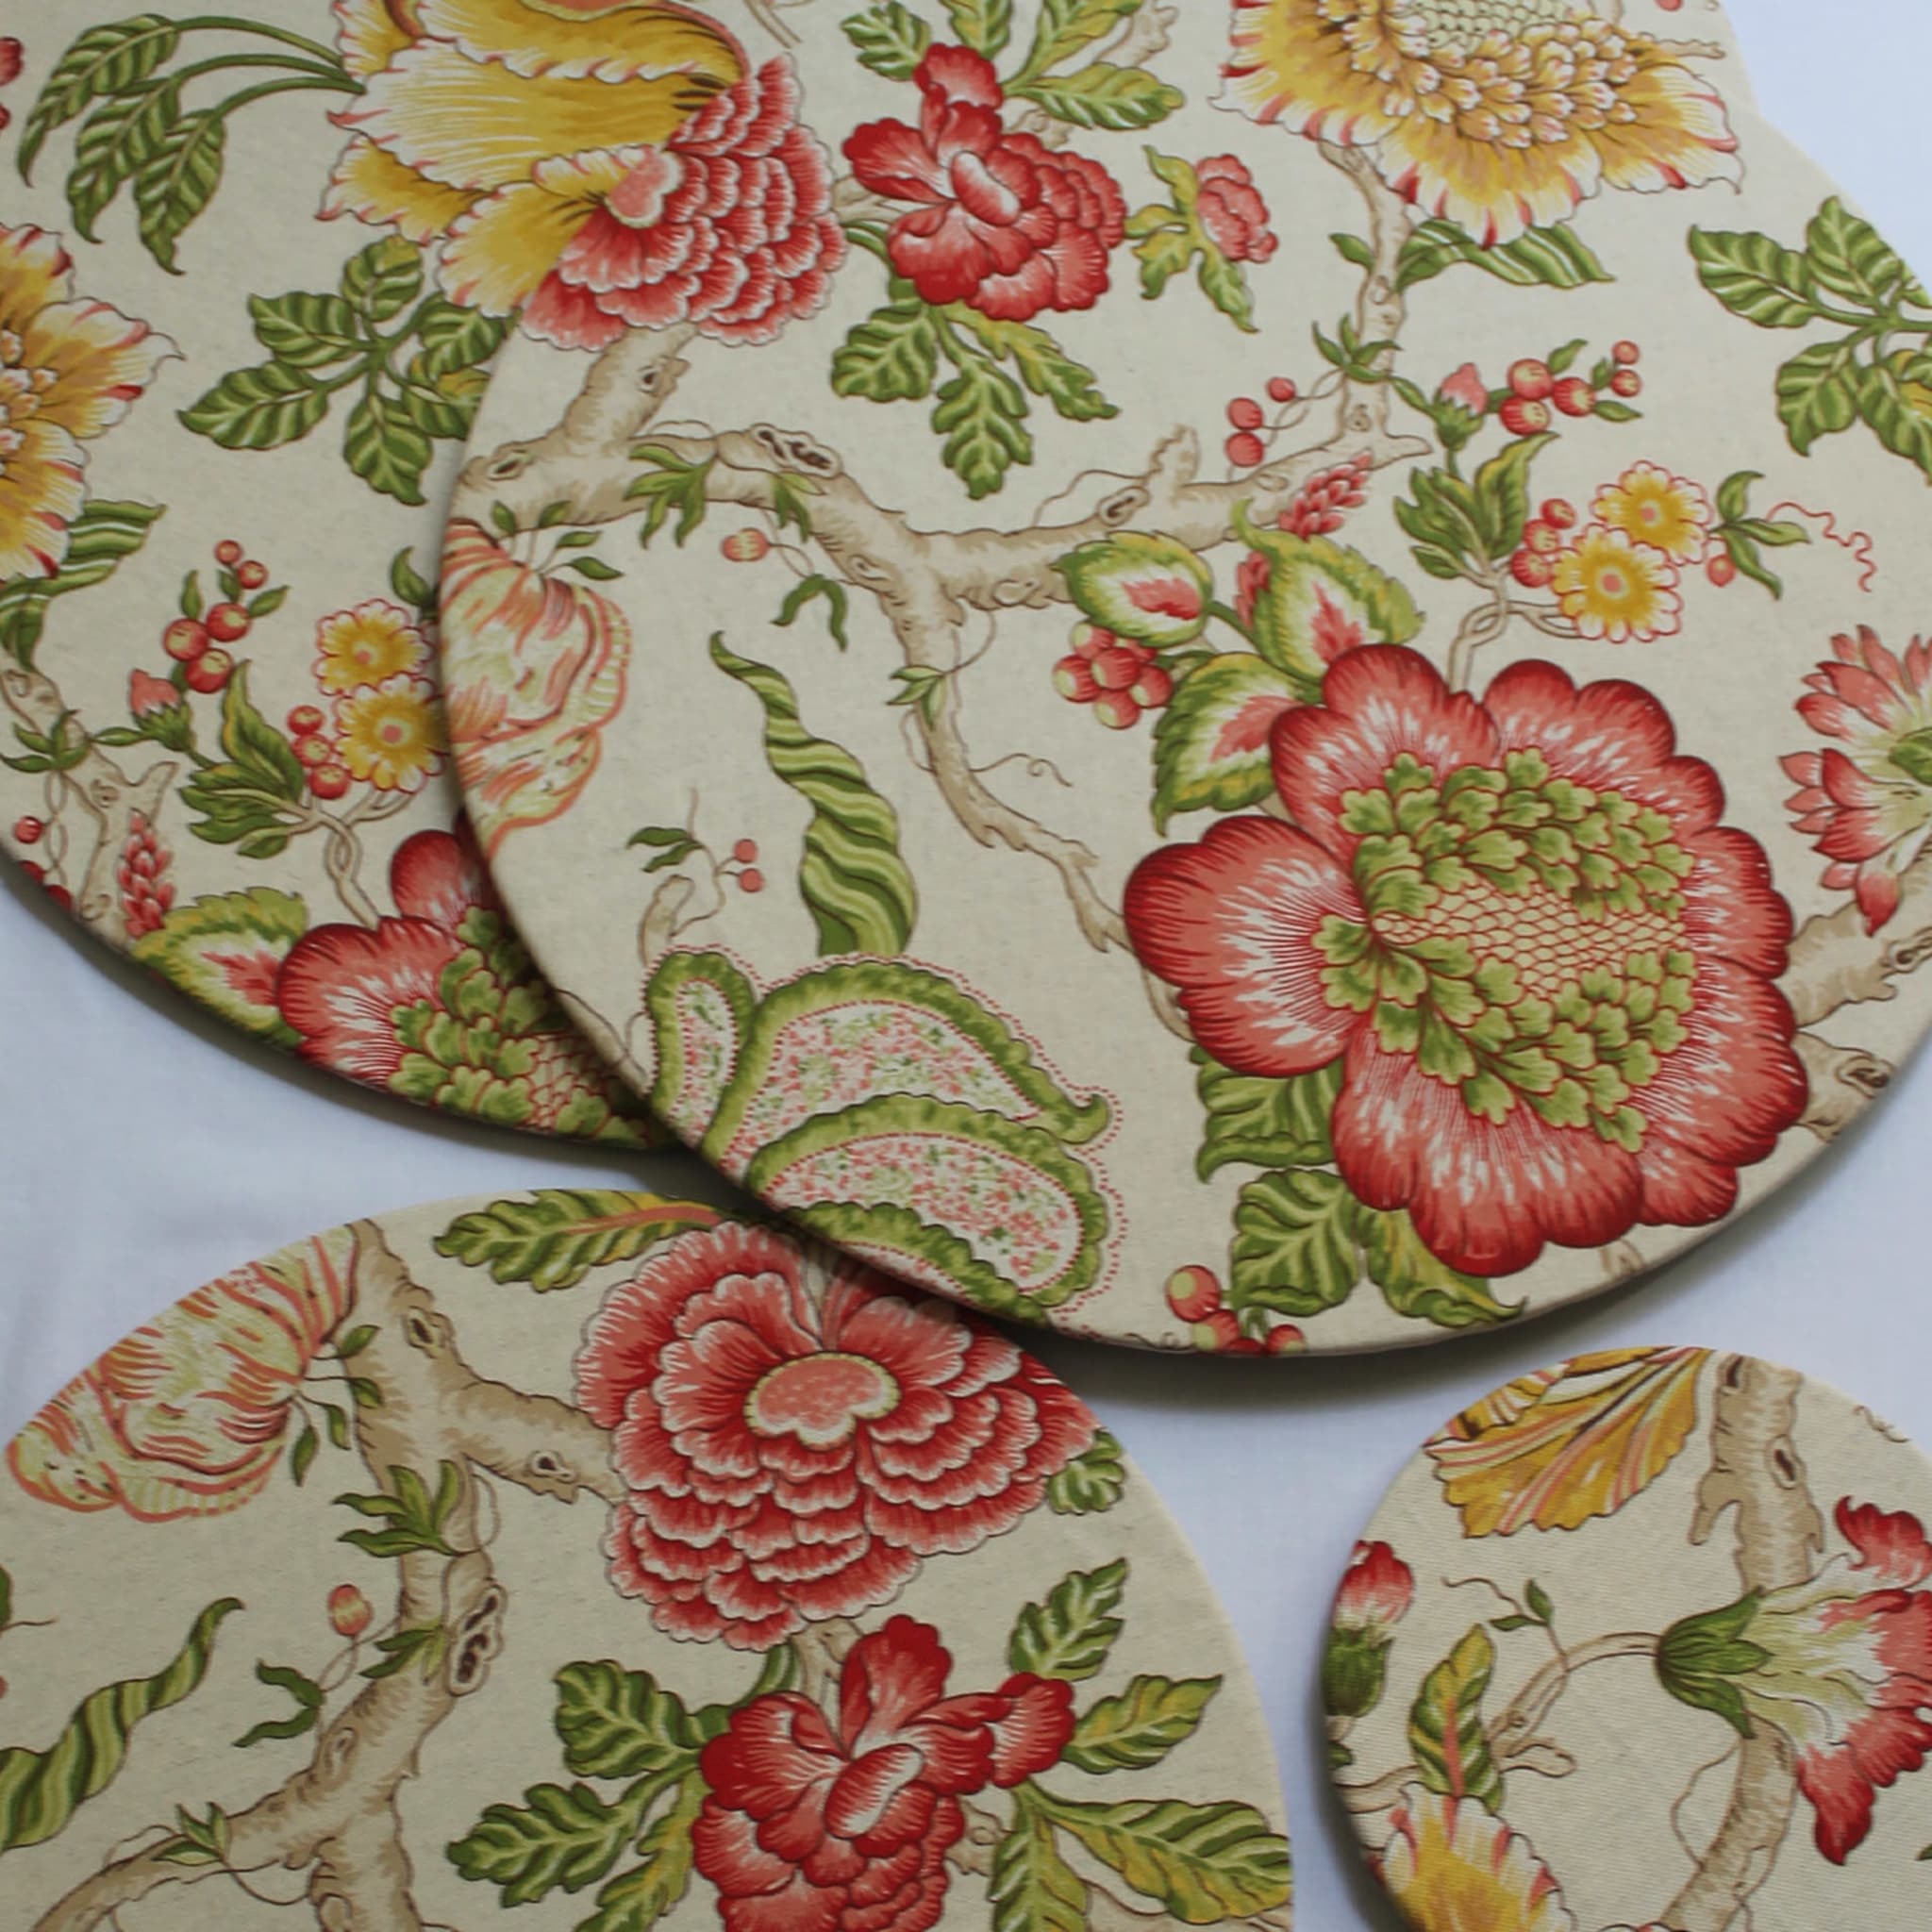 Set of 2 Cuffiette Extra-Small Round Floral Placemats #1 - Alternative view 1